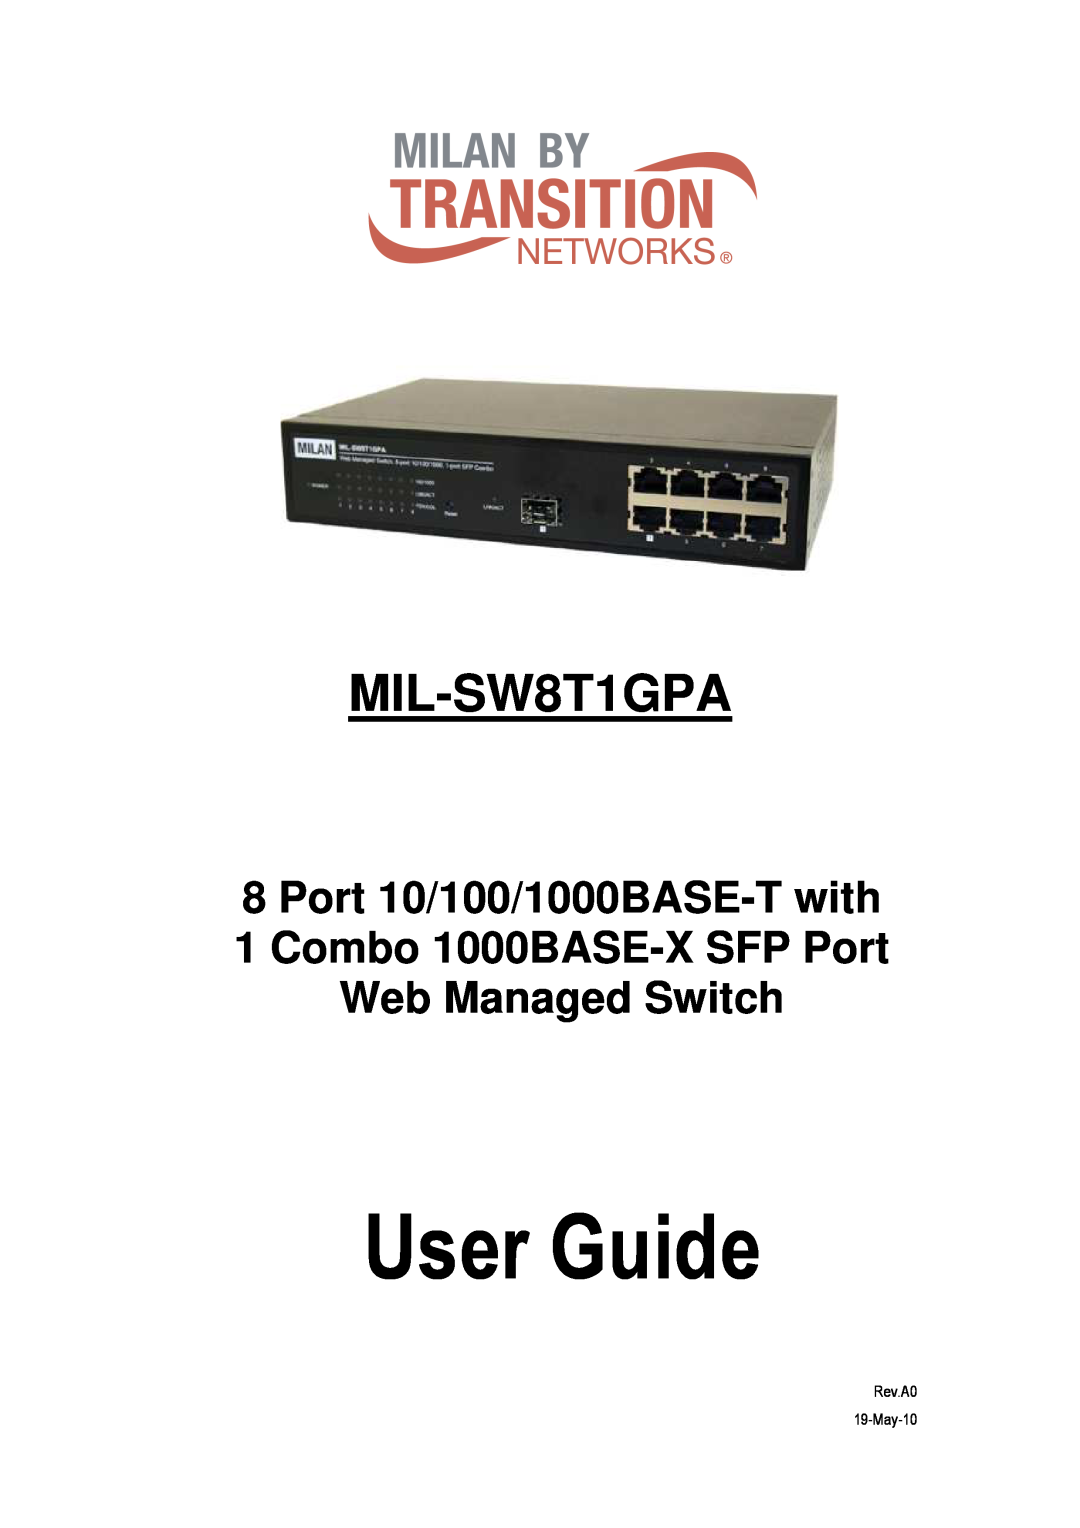 Transition Networks MIL-SW8T1GPA manual Port 10/100/1000BASE-T with, Combo 1000BASE-X SFP Port Web Managed Switch 